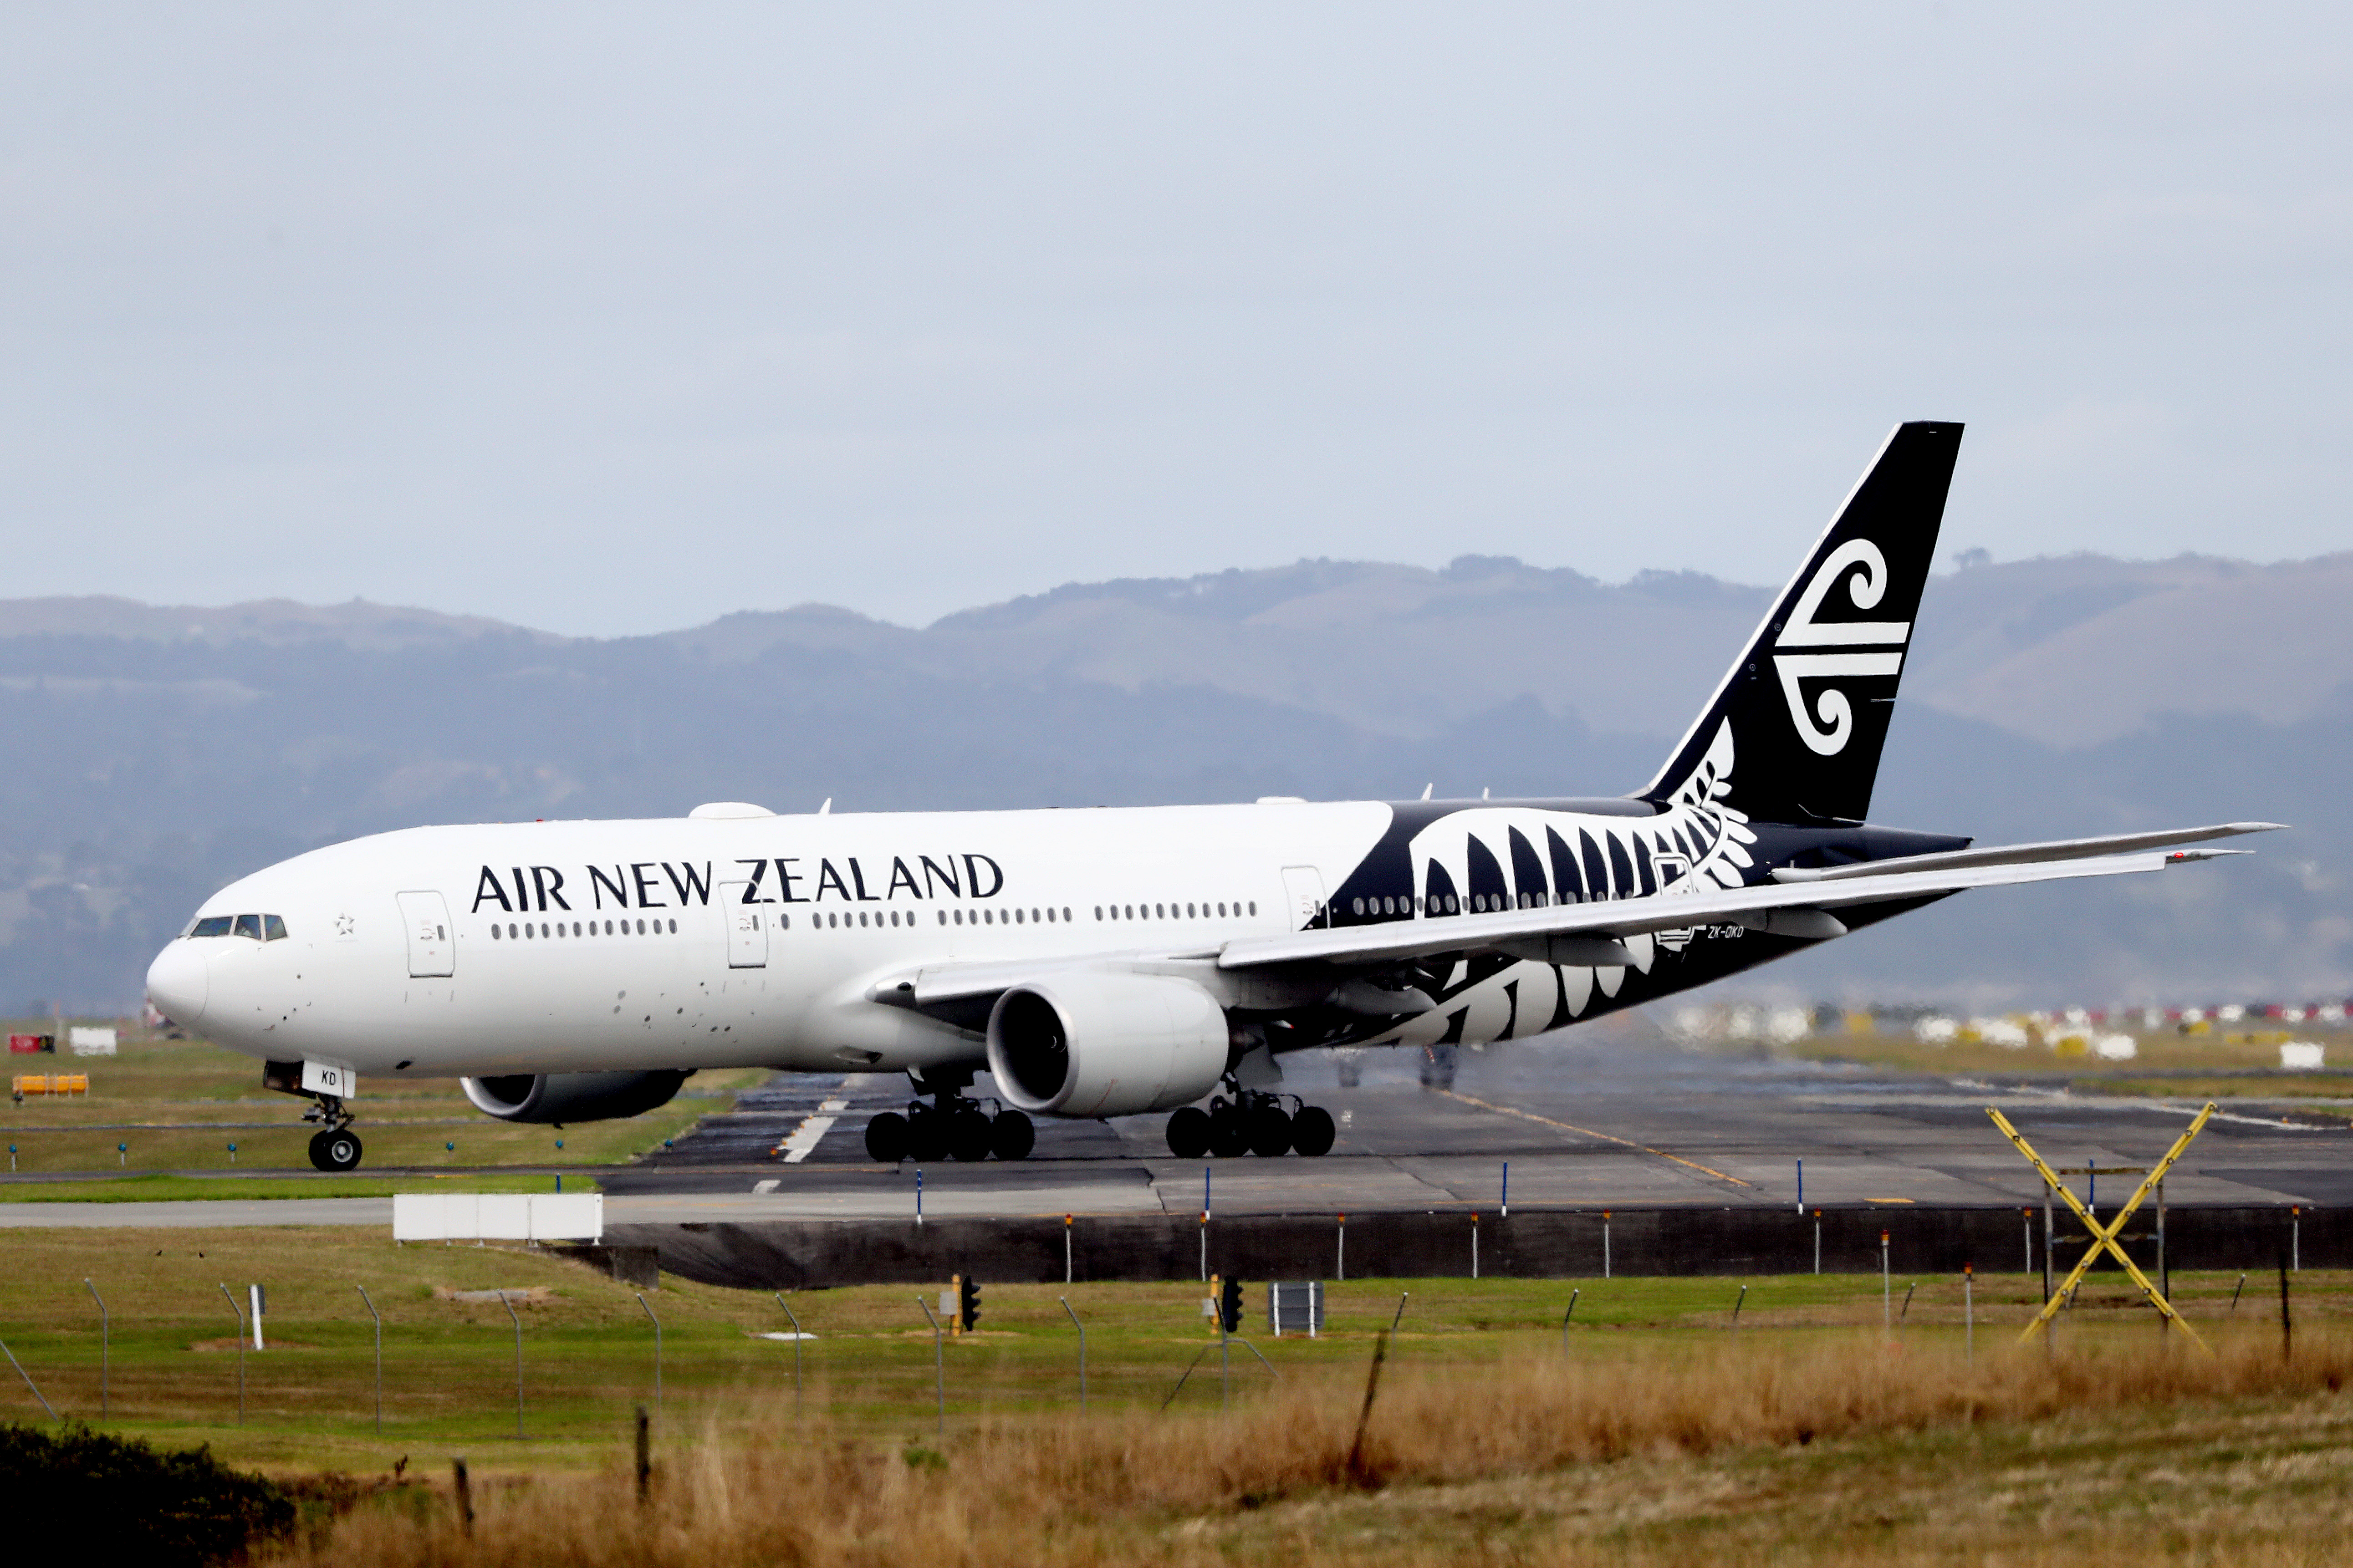 An Air New Zealand plane in Auckland.